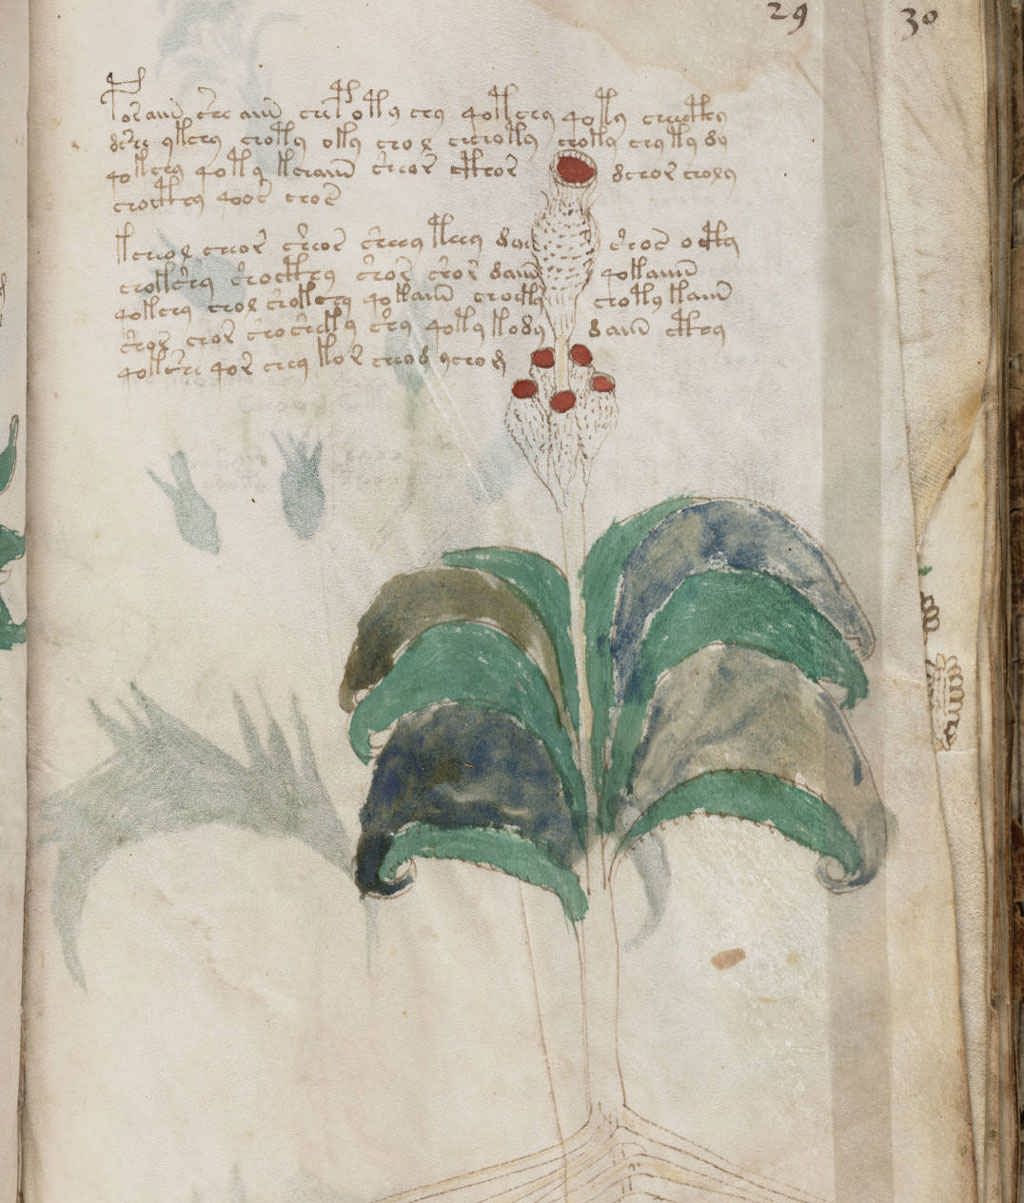 An image of the plant section of the Voynich manuscripts.